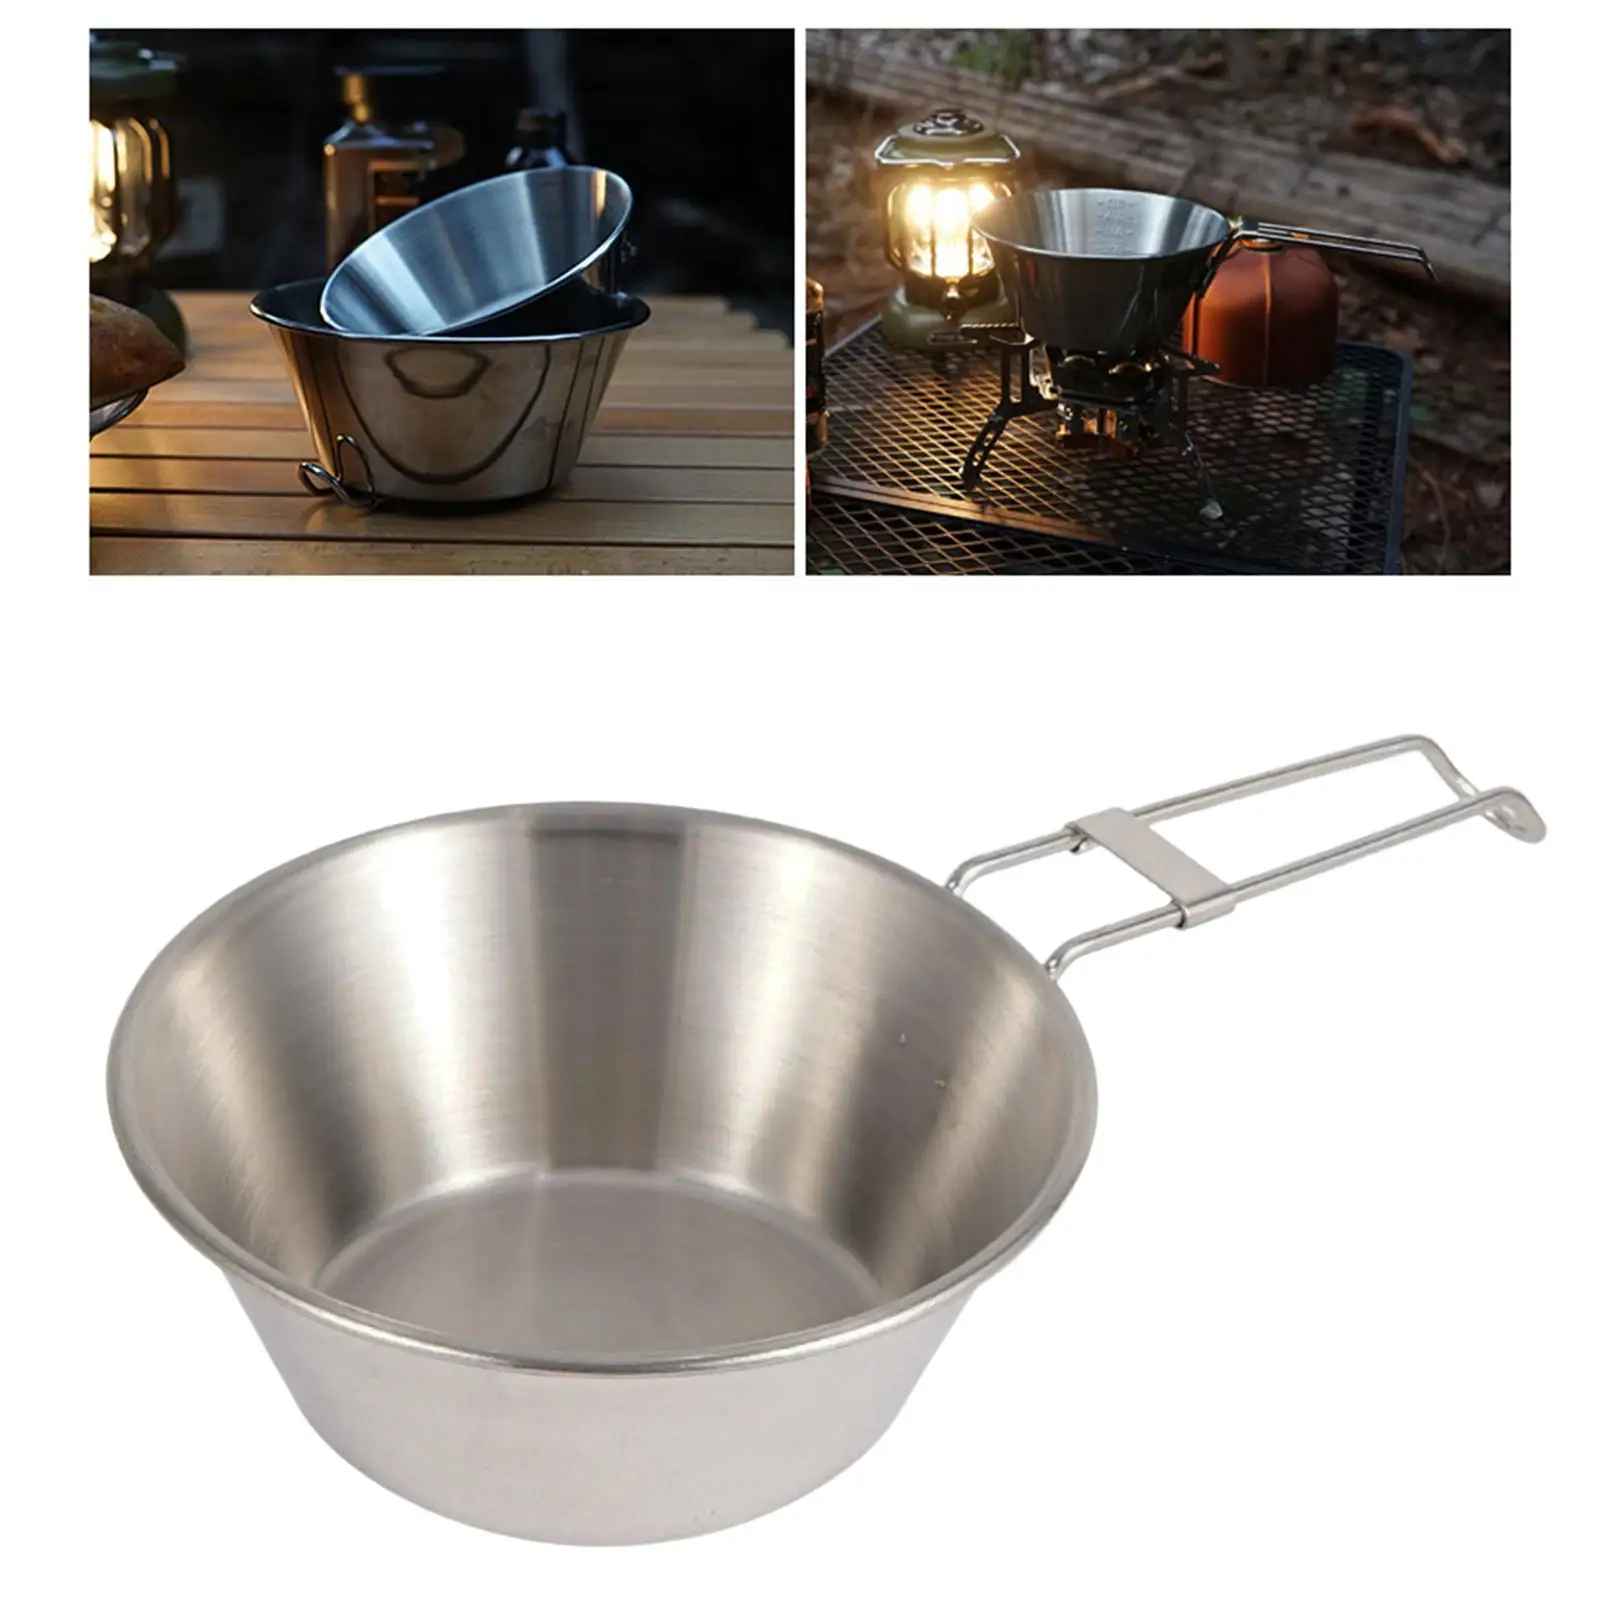 Outdoor Camping Bowl Tableware Utensils with Folding Handle Container Baking Basin Cooking for Barbecue Backpacking Beach BBQ